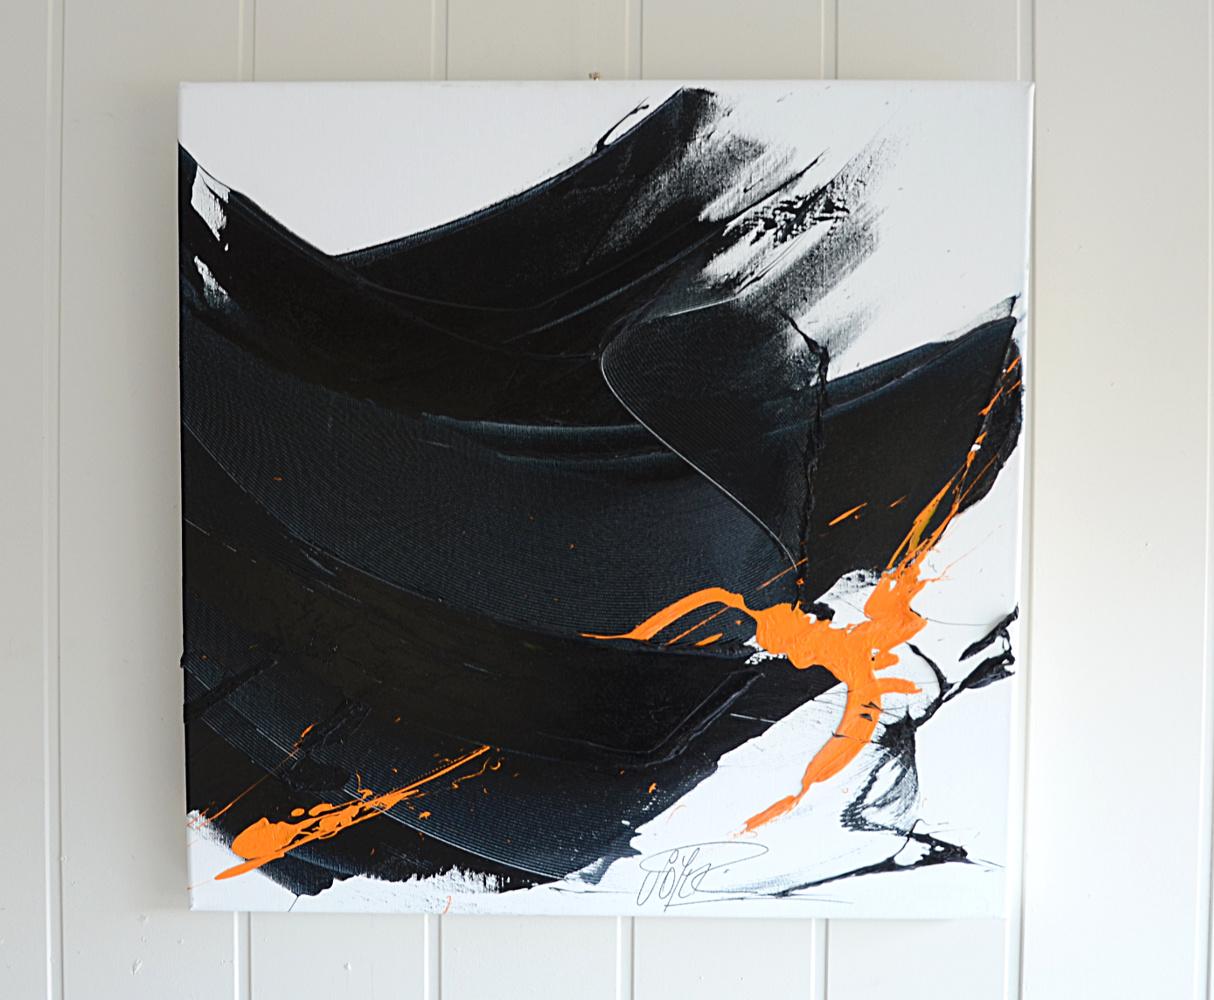 Black on White with Orange Spurt Abstract Squared Oil Painting, Untitled 9